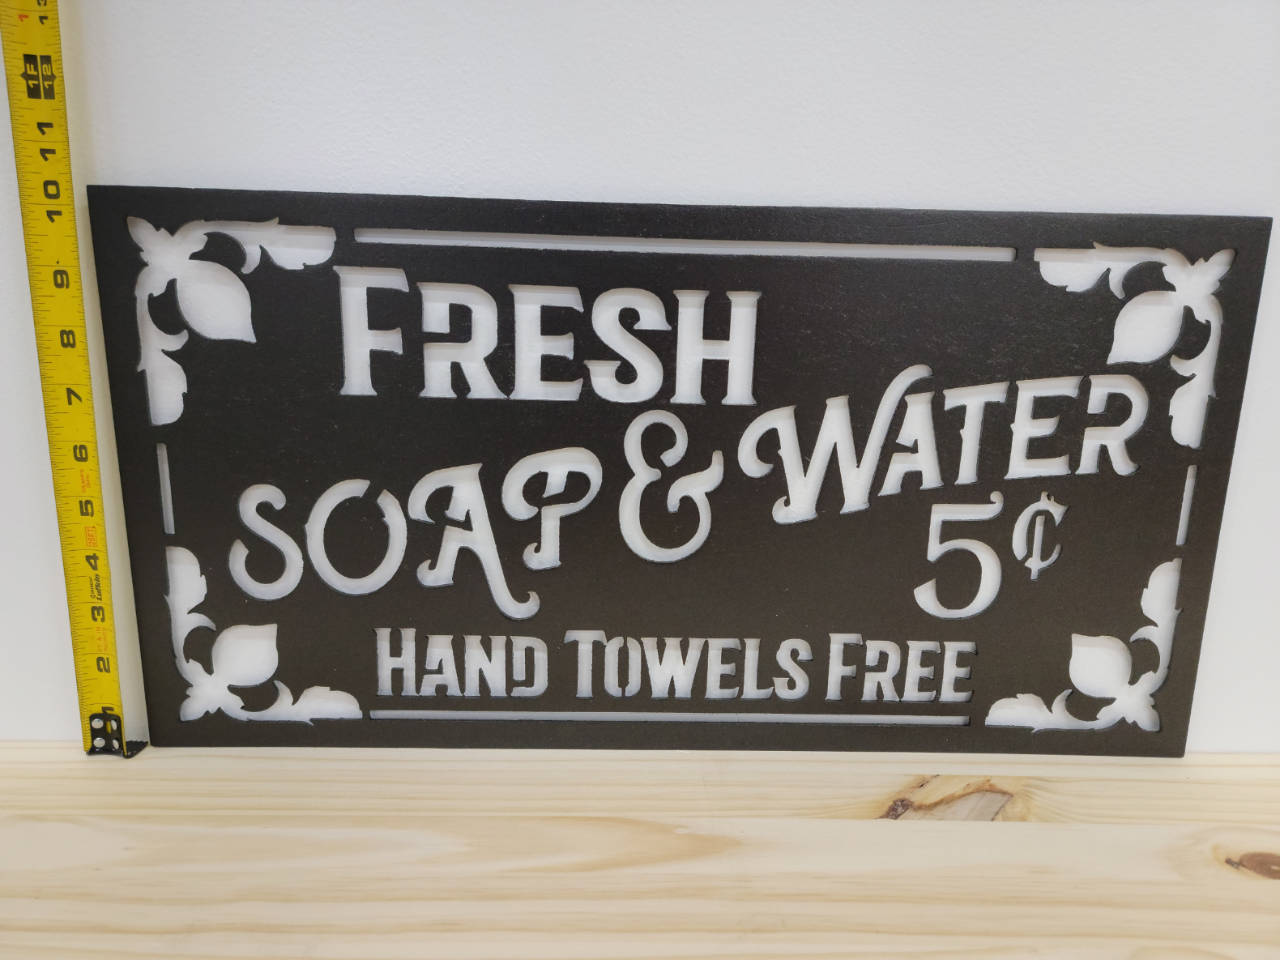 Fresh soap & water 5¢ Hand Towels Free - Bath or Laundry Sign